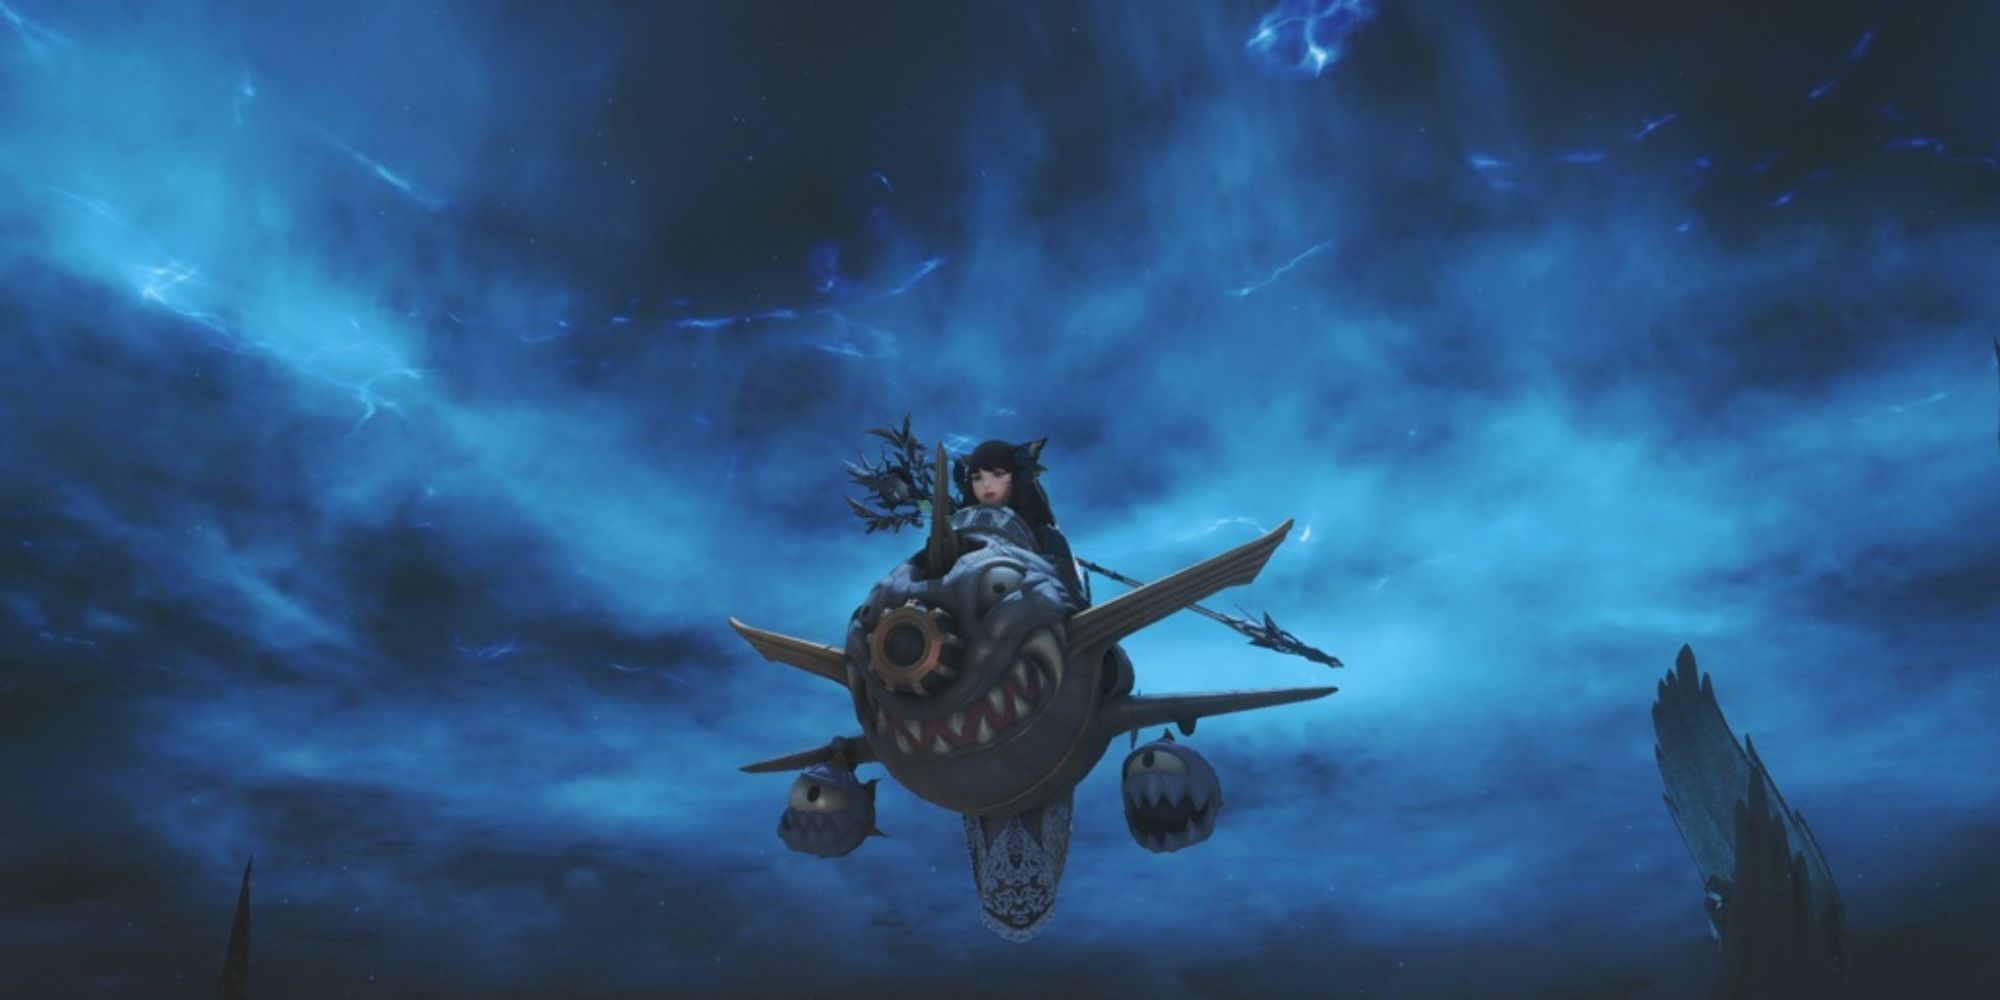 Lalafel Riding Air Force Mount In Night Blue Sky With Lightning 